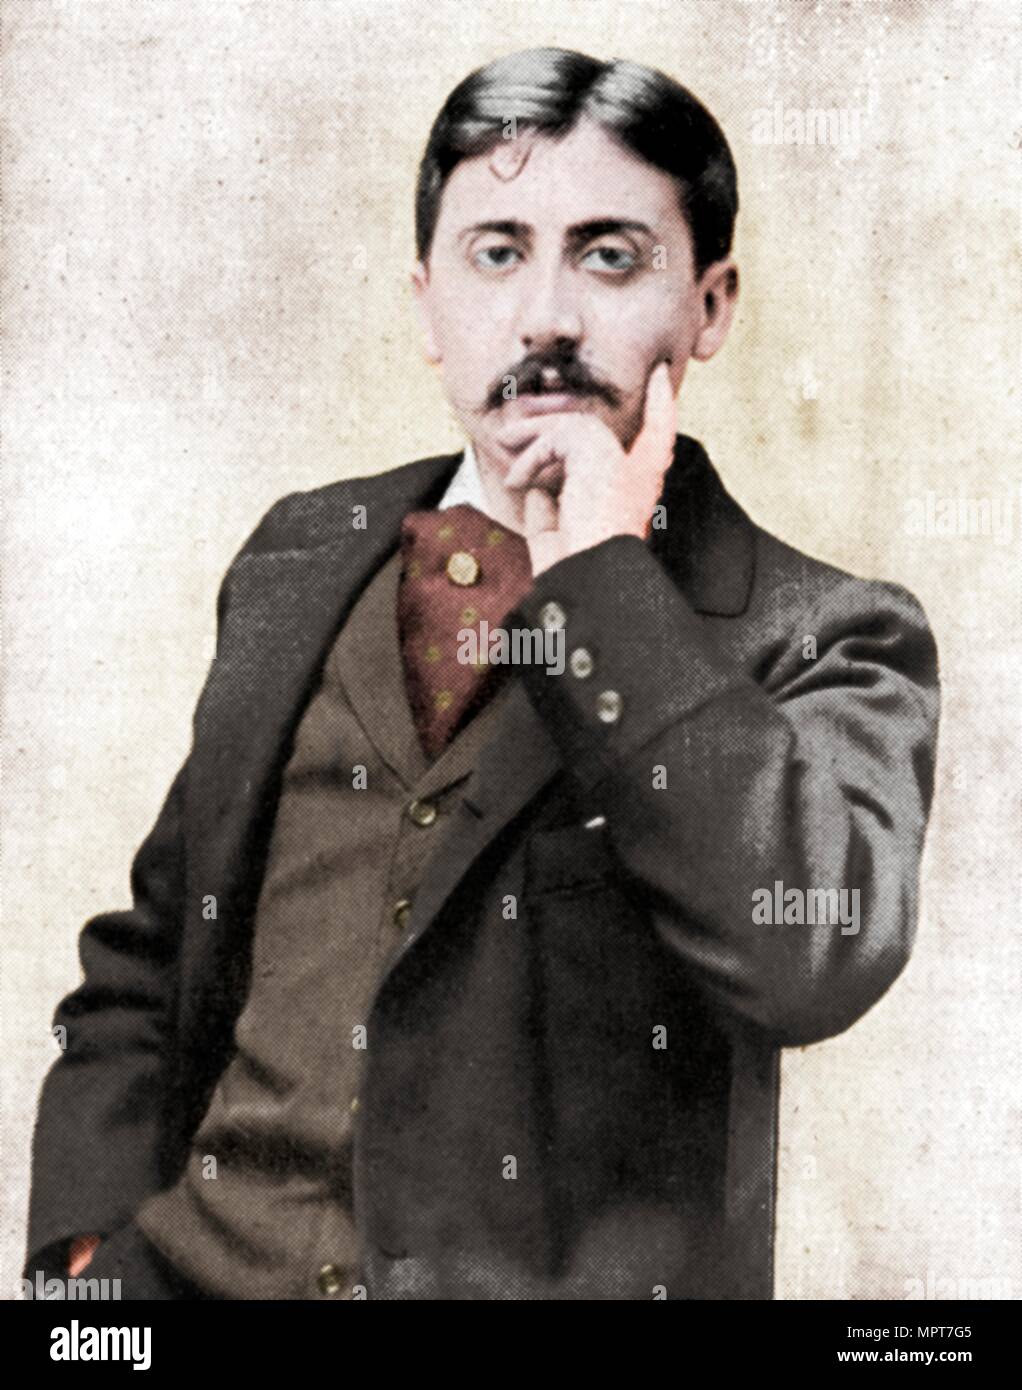 Marcel Proust, French intellectual, novelist, essayist and critic, late 19th-early 20th century. Artist: Otto. Stock Photo